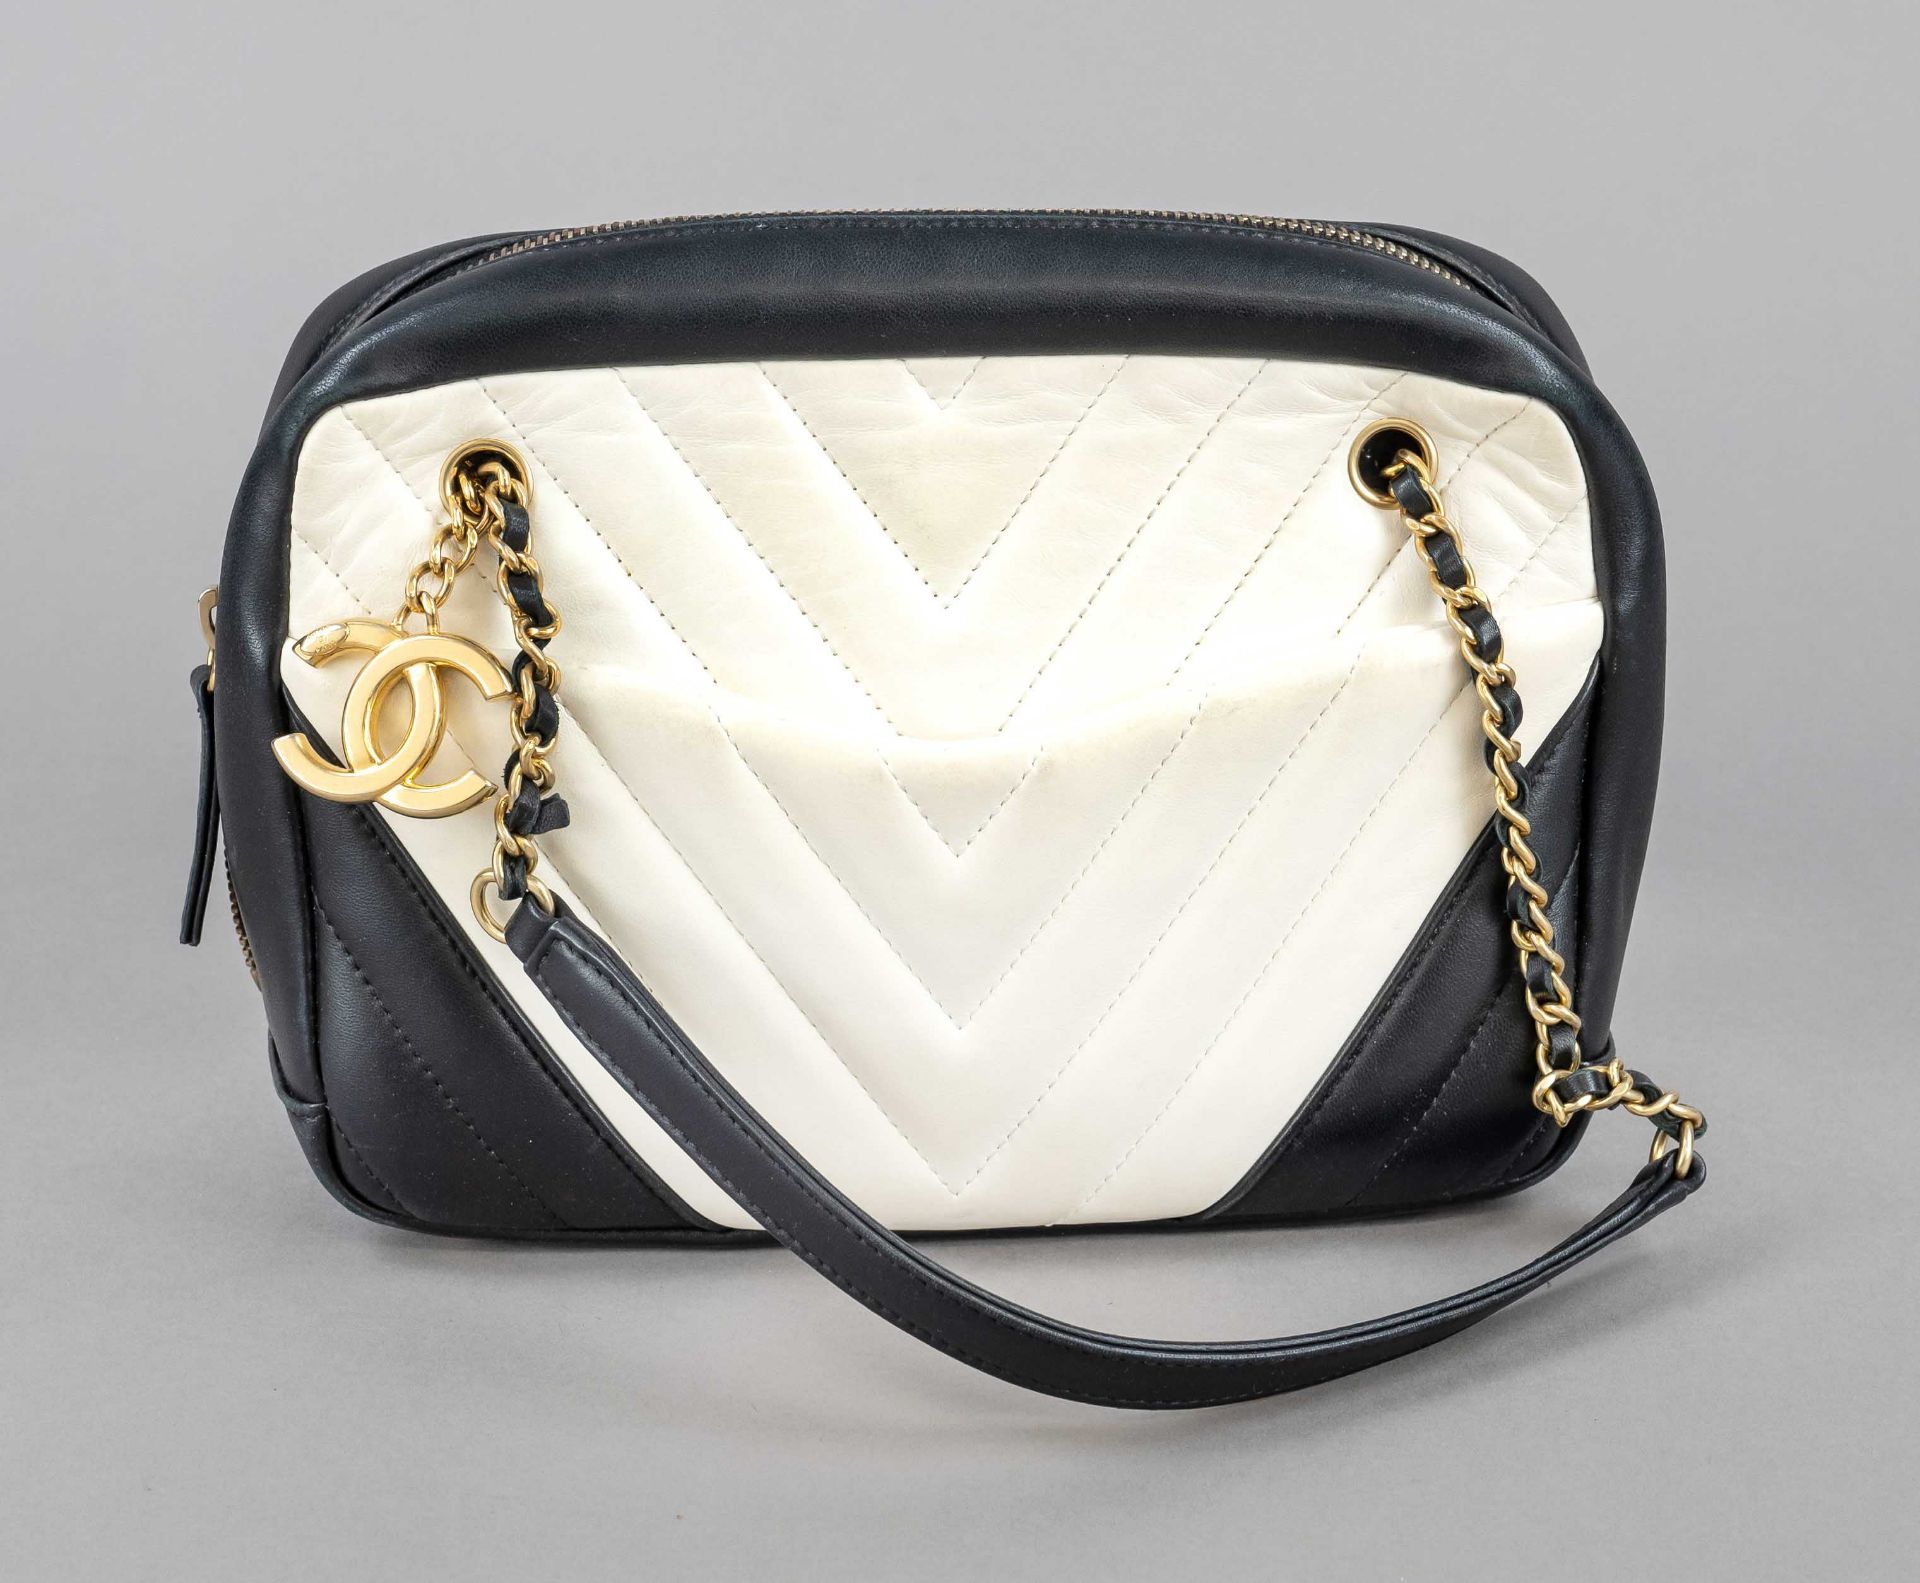 Chanel, Vintage Quilted Chevron Crossbody Bag, fine black and cream white quilted leather, gold-tone